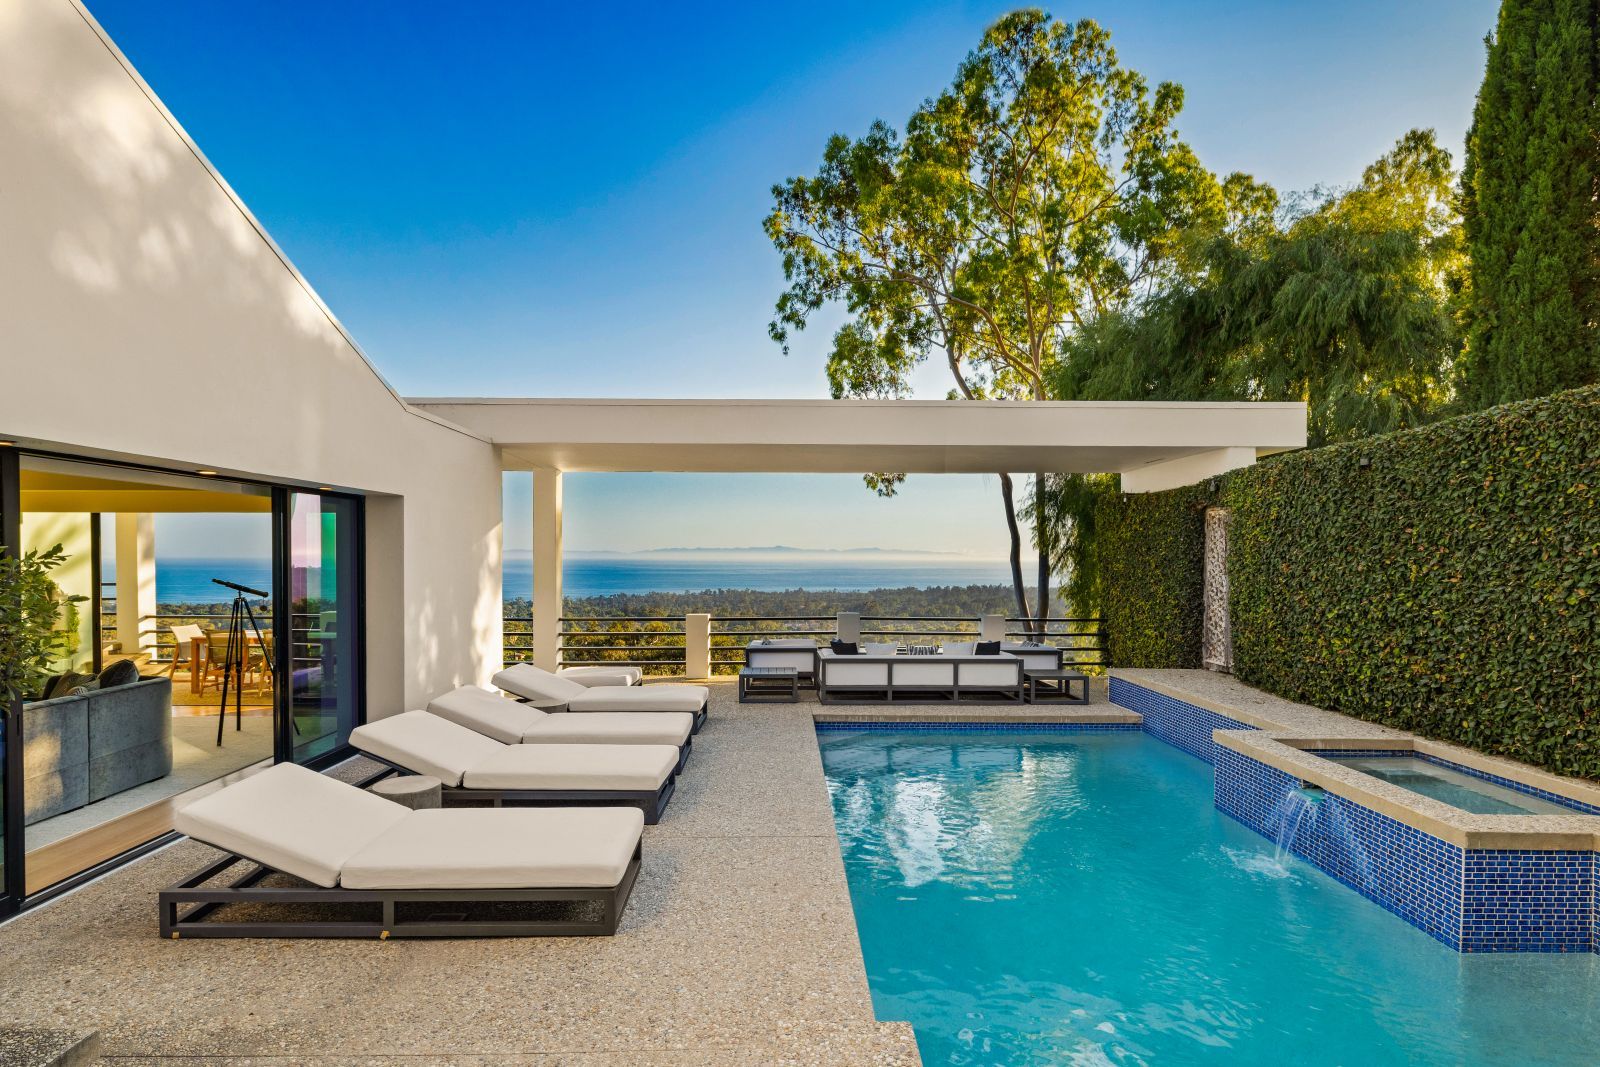 The pool courtyard of a contemporary Montecito estate with lounge chairs, a pool and the ocean in the background.